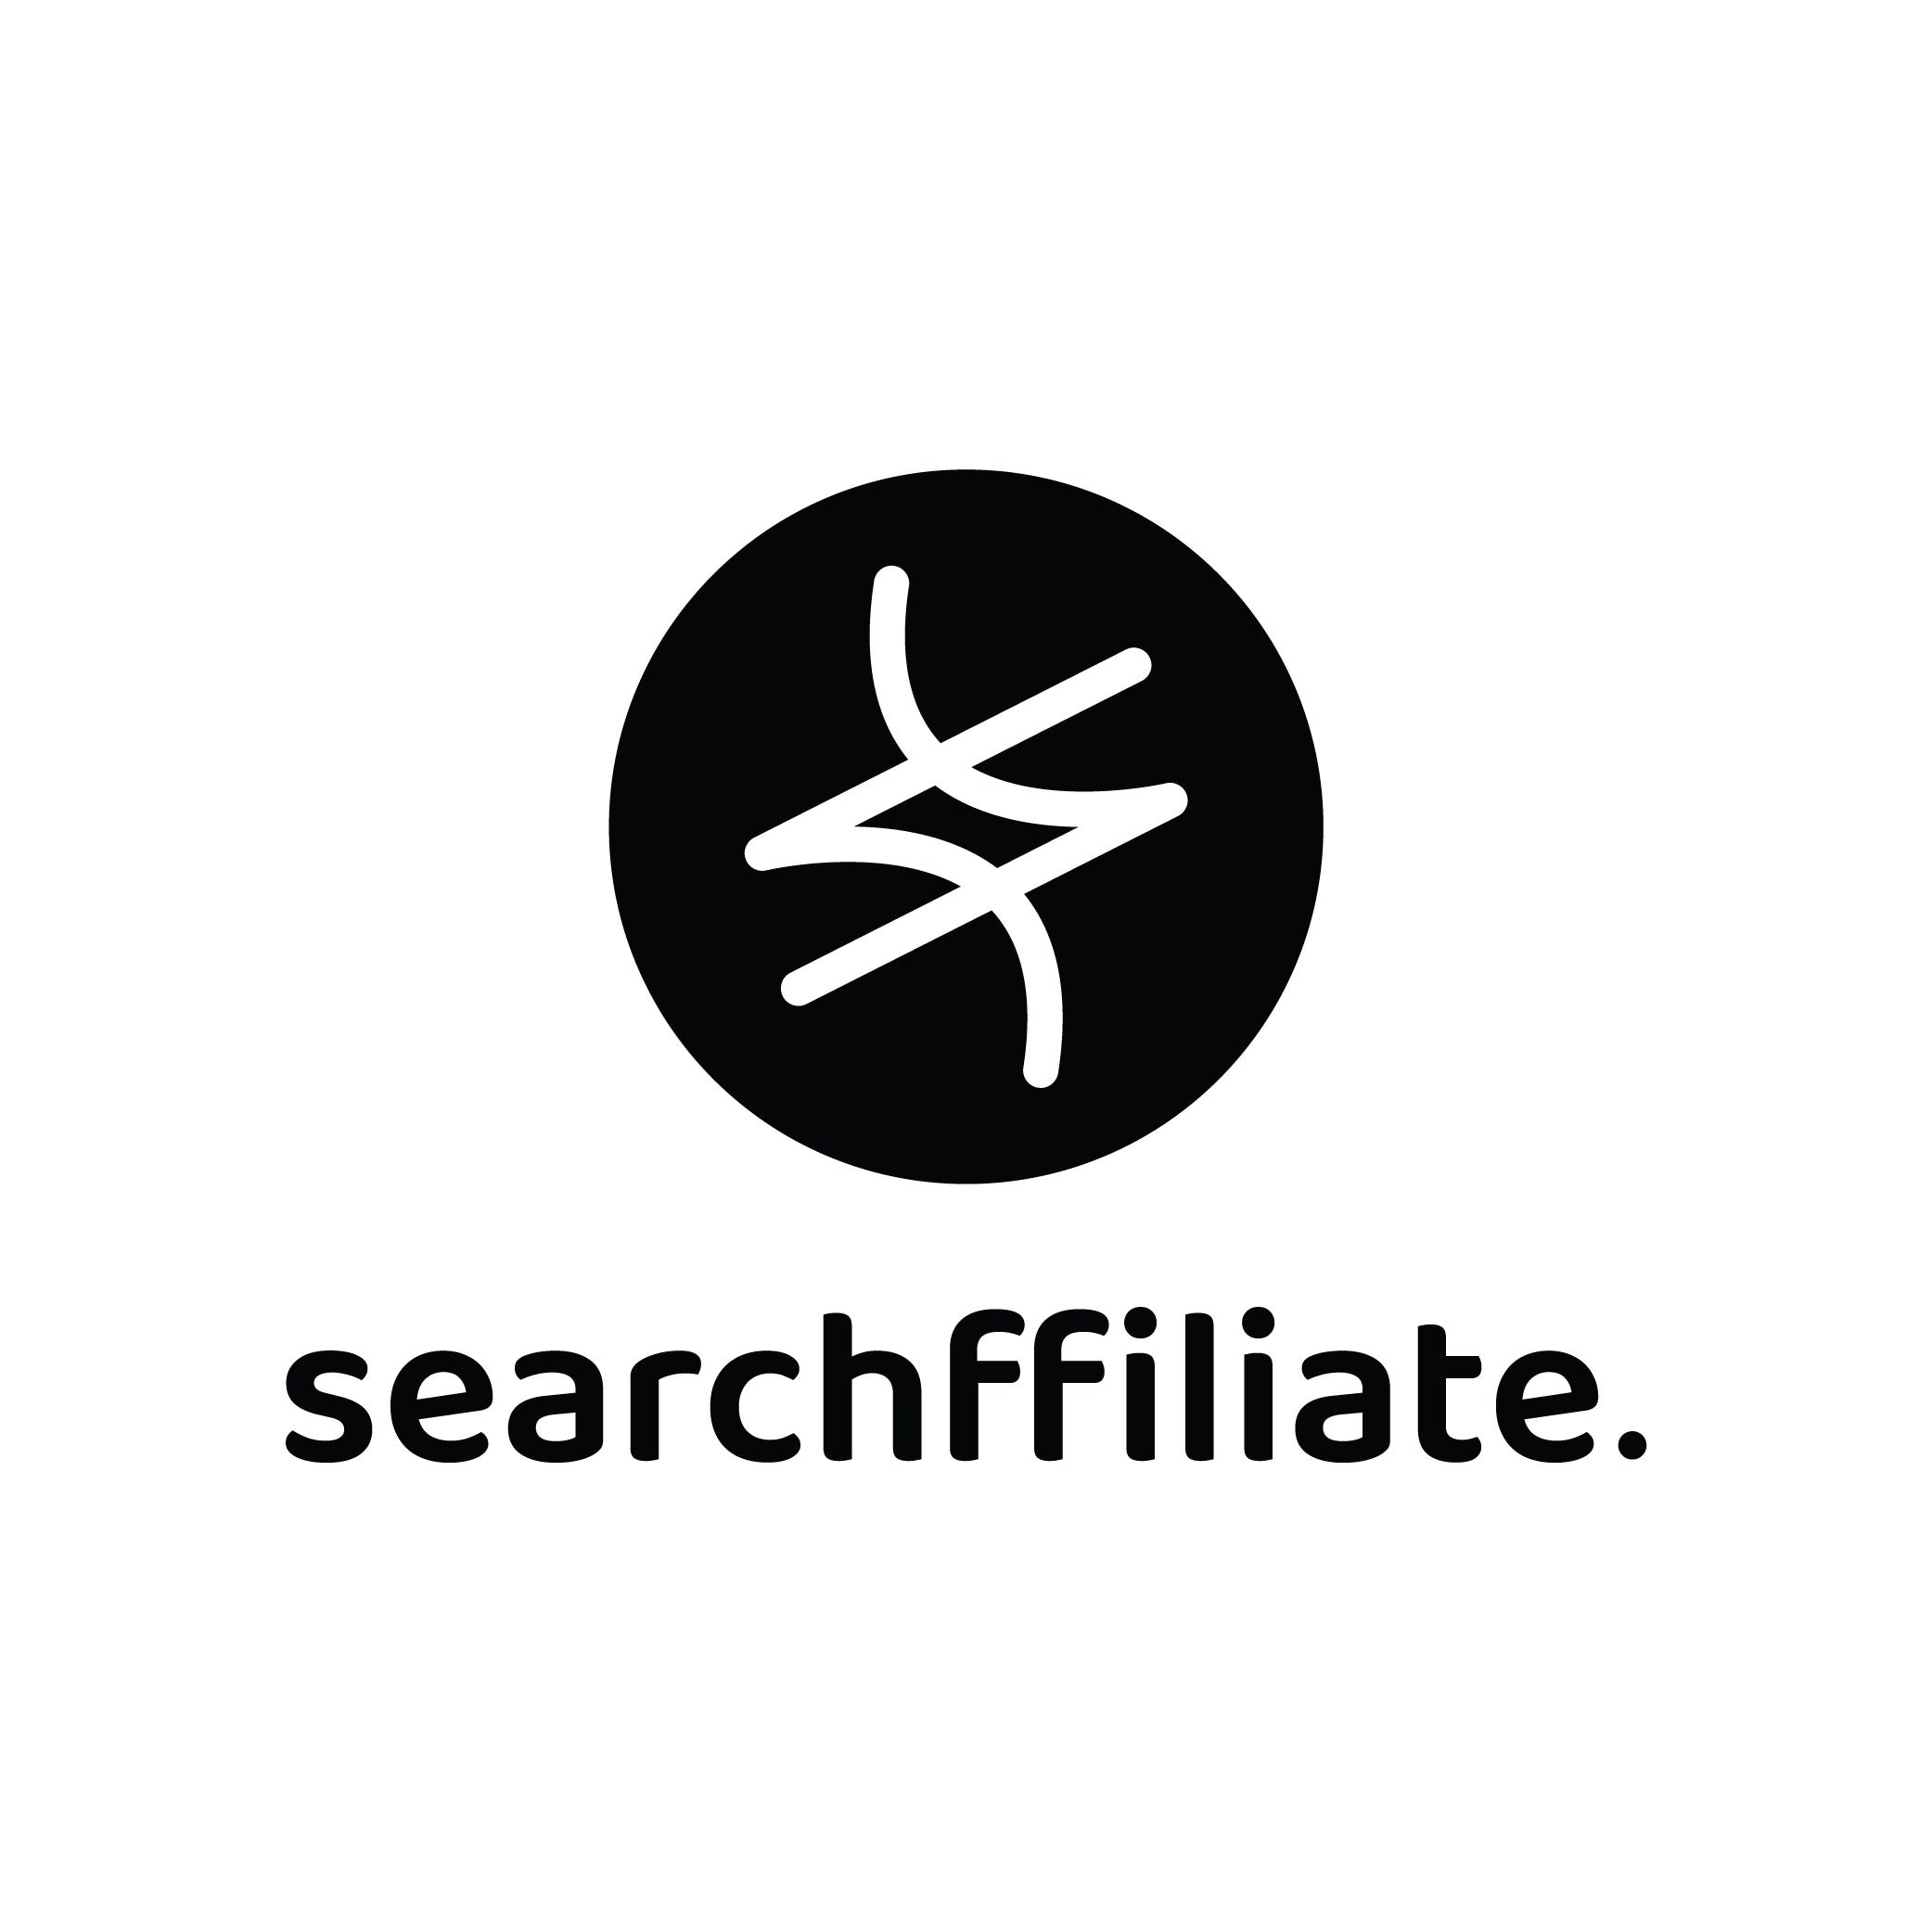 Find Top Brands as a Publisher through Searchffiliate Affiliate Marketing